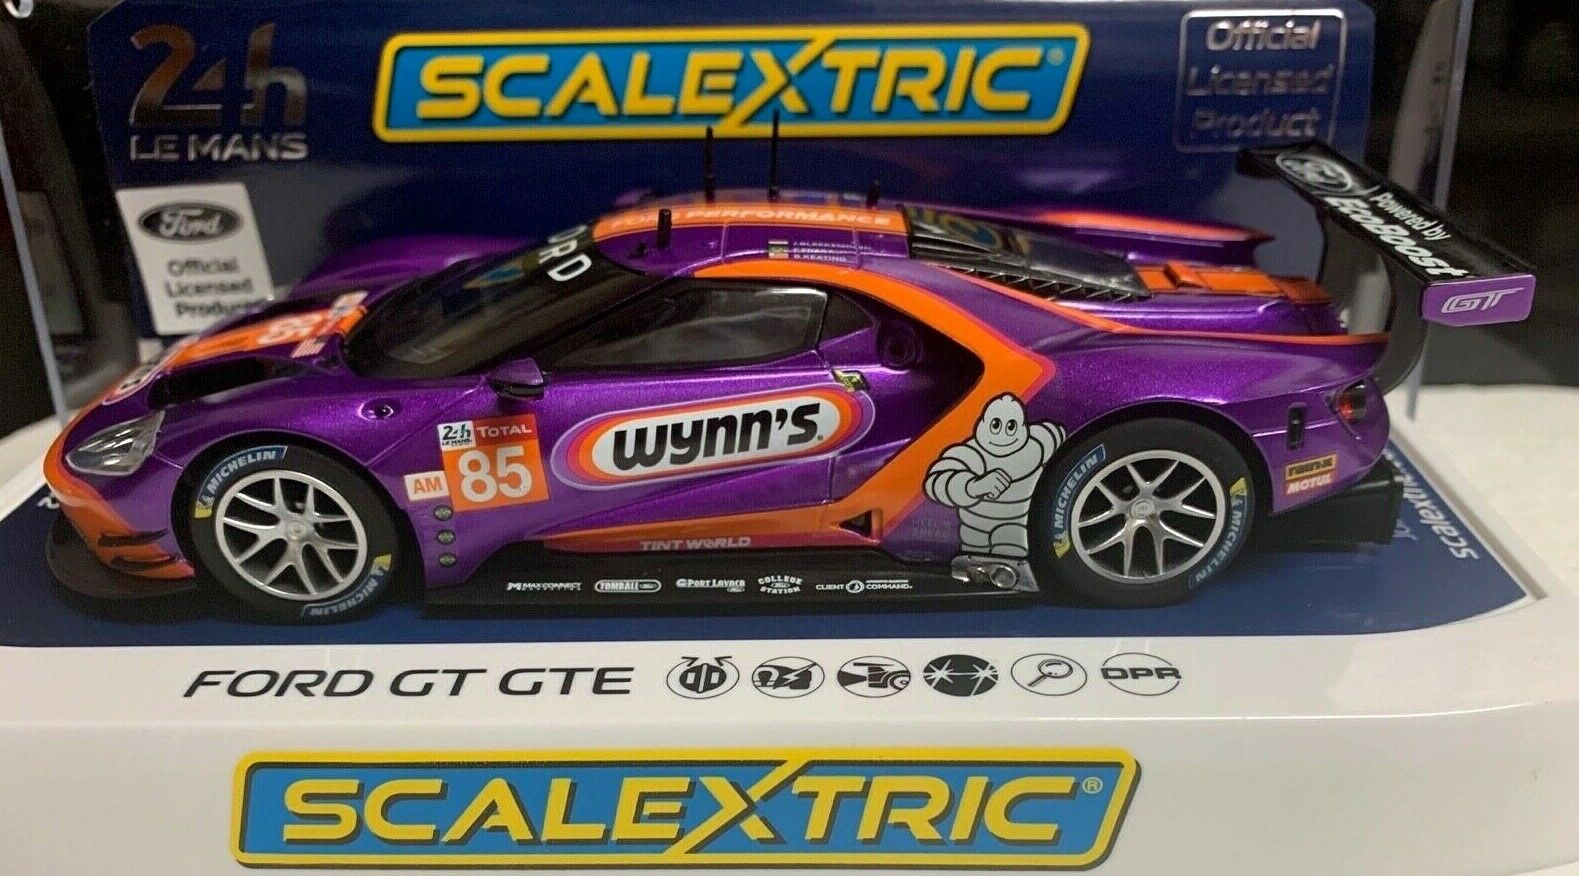 1 32 Scalextric C4078 Ford Gt Gte Wynn's  24 Hours Of Le Mans Disct'd Slot Car